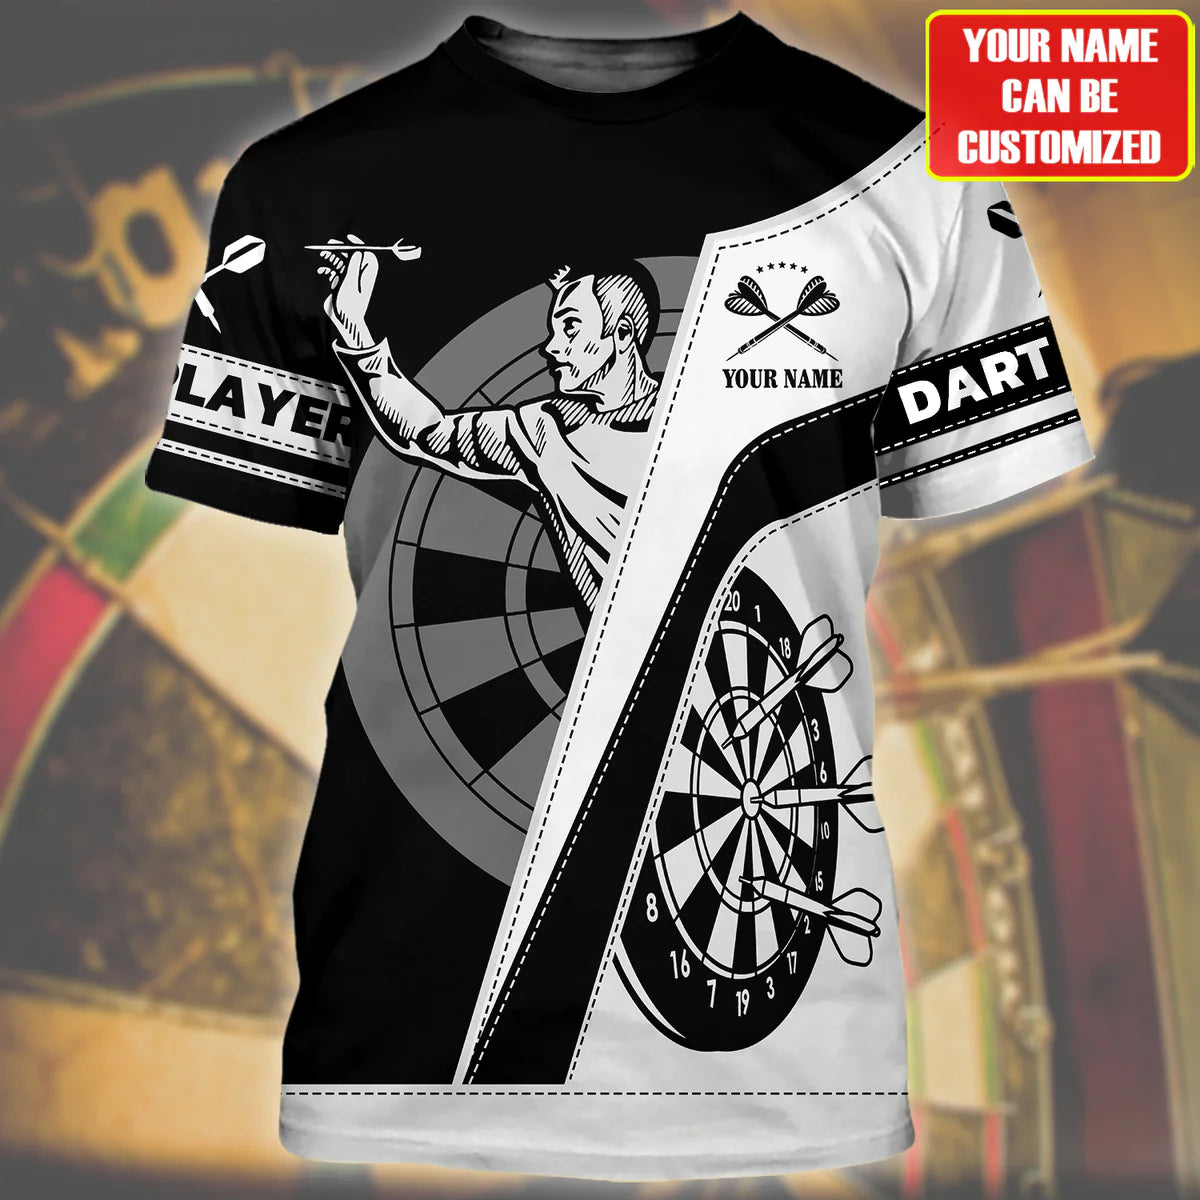 Personalized Darts All Over Printed Unisex Shirt, Darts love gifts, Present to Darts player – DT046